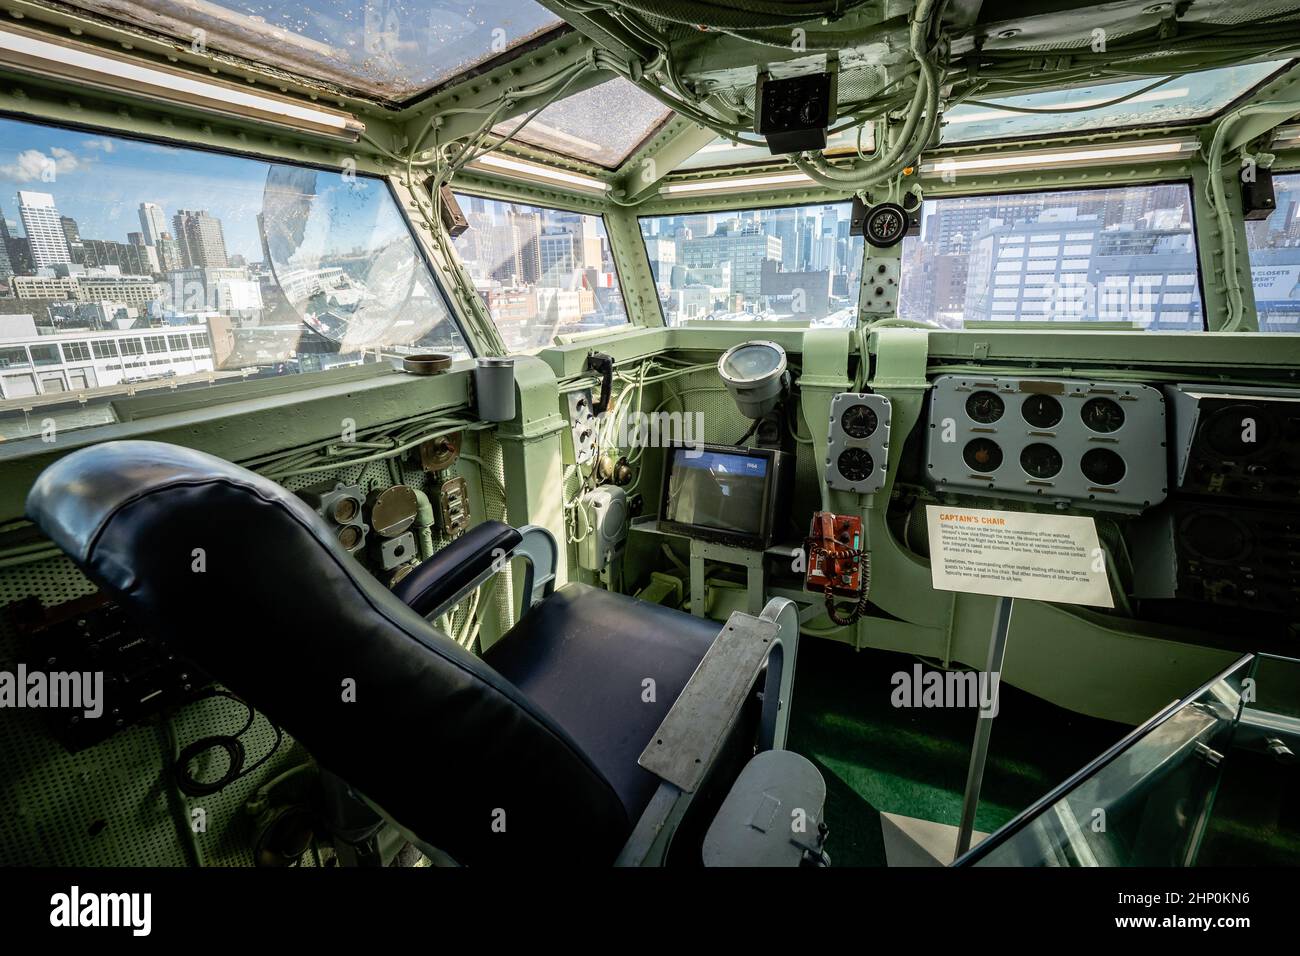 View of the Captain's chair on the command bridge of the USS Intrepid aircraft carrier, Intrepid Sea, Air and Space Museum, New York, NY, USA Stock Photo